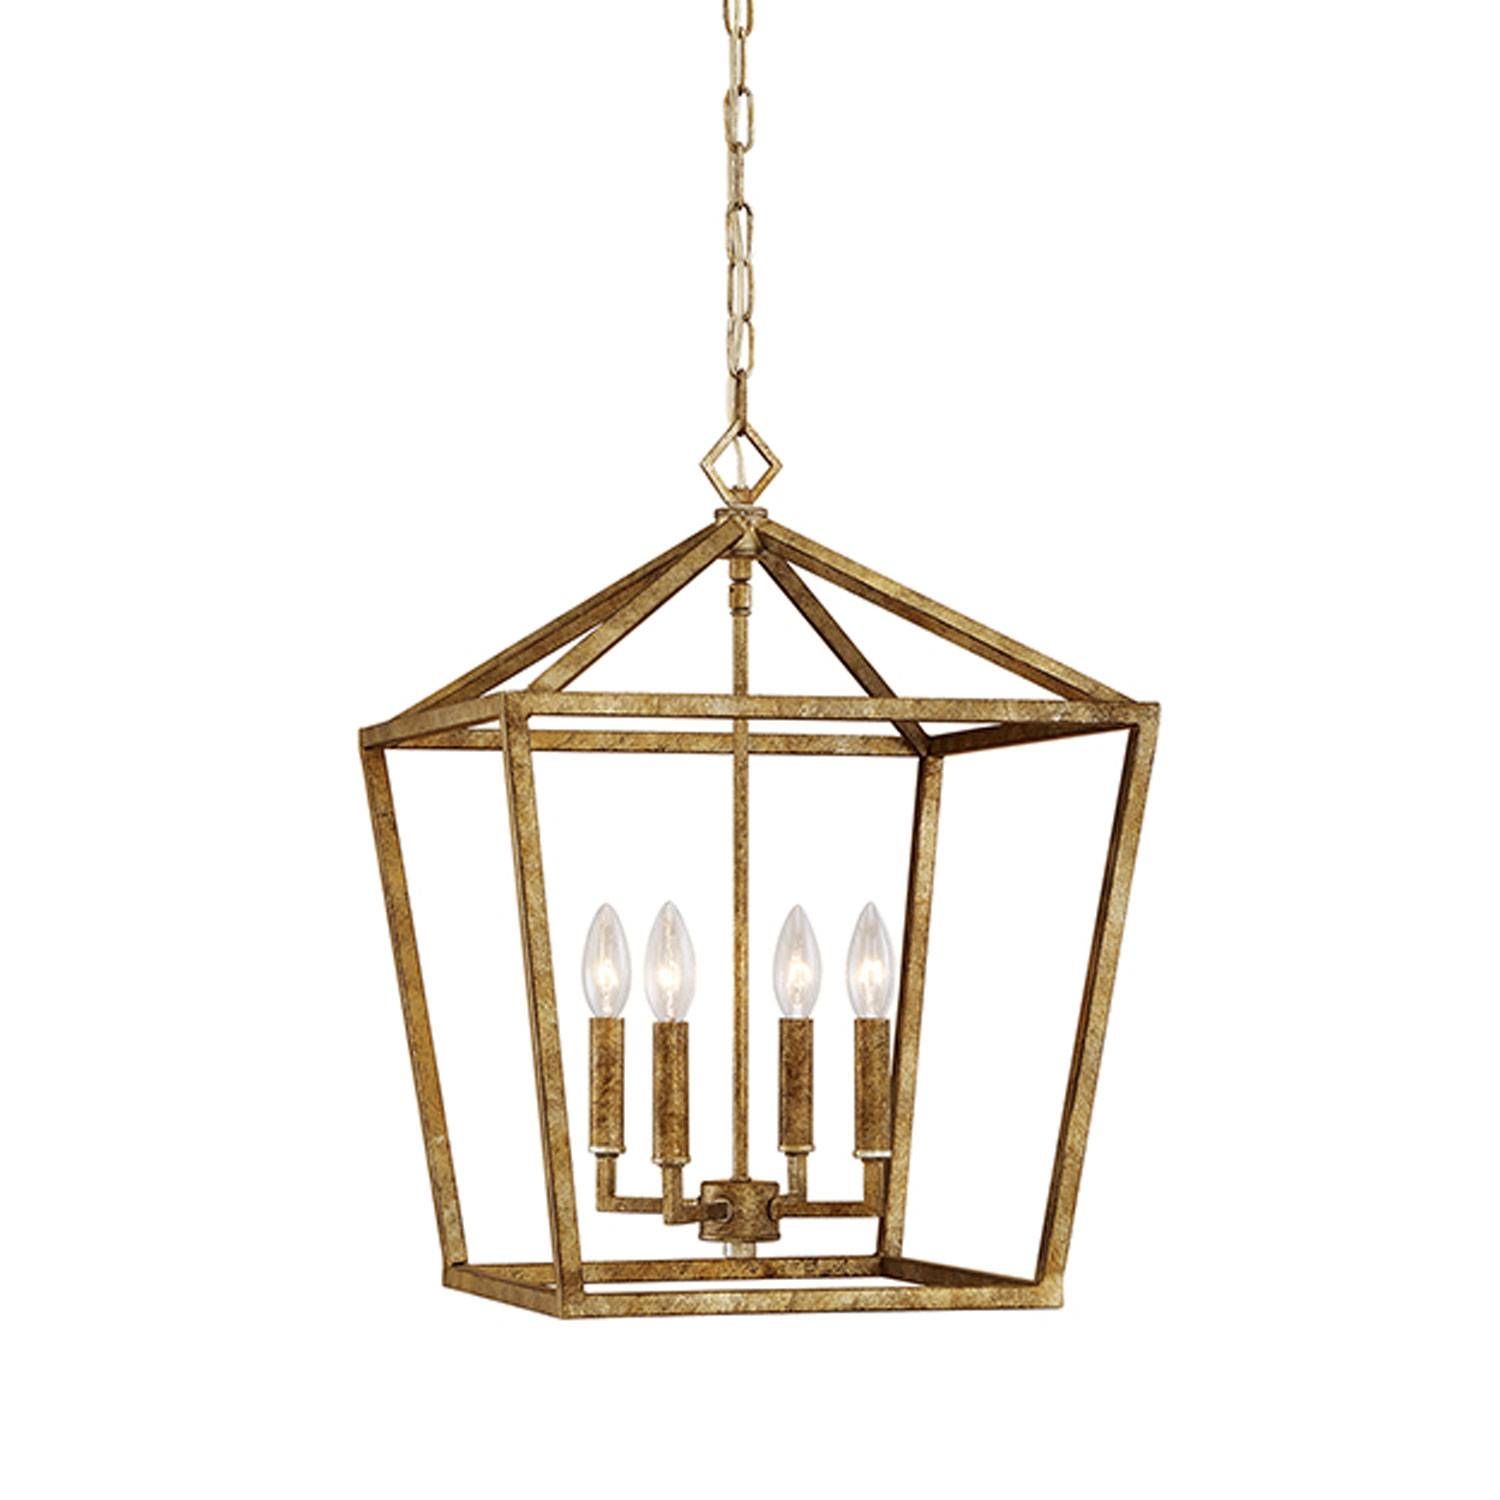 Bellacor Lantern Pendant Lighting Adds A Cheery Glow To Any Room With Regard To Lantern Style Pendant Lighting (View 11 of 15)